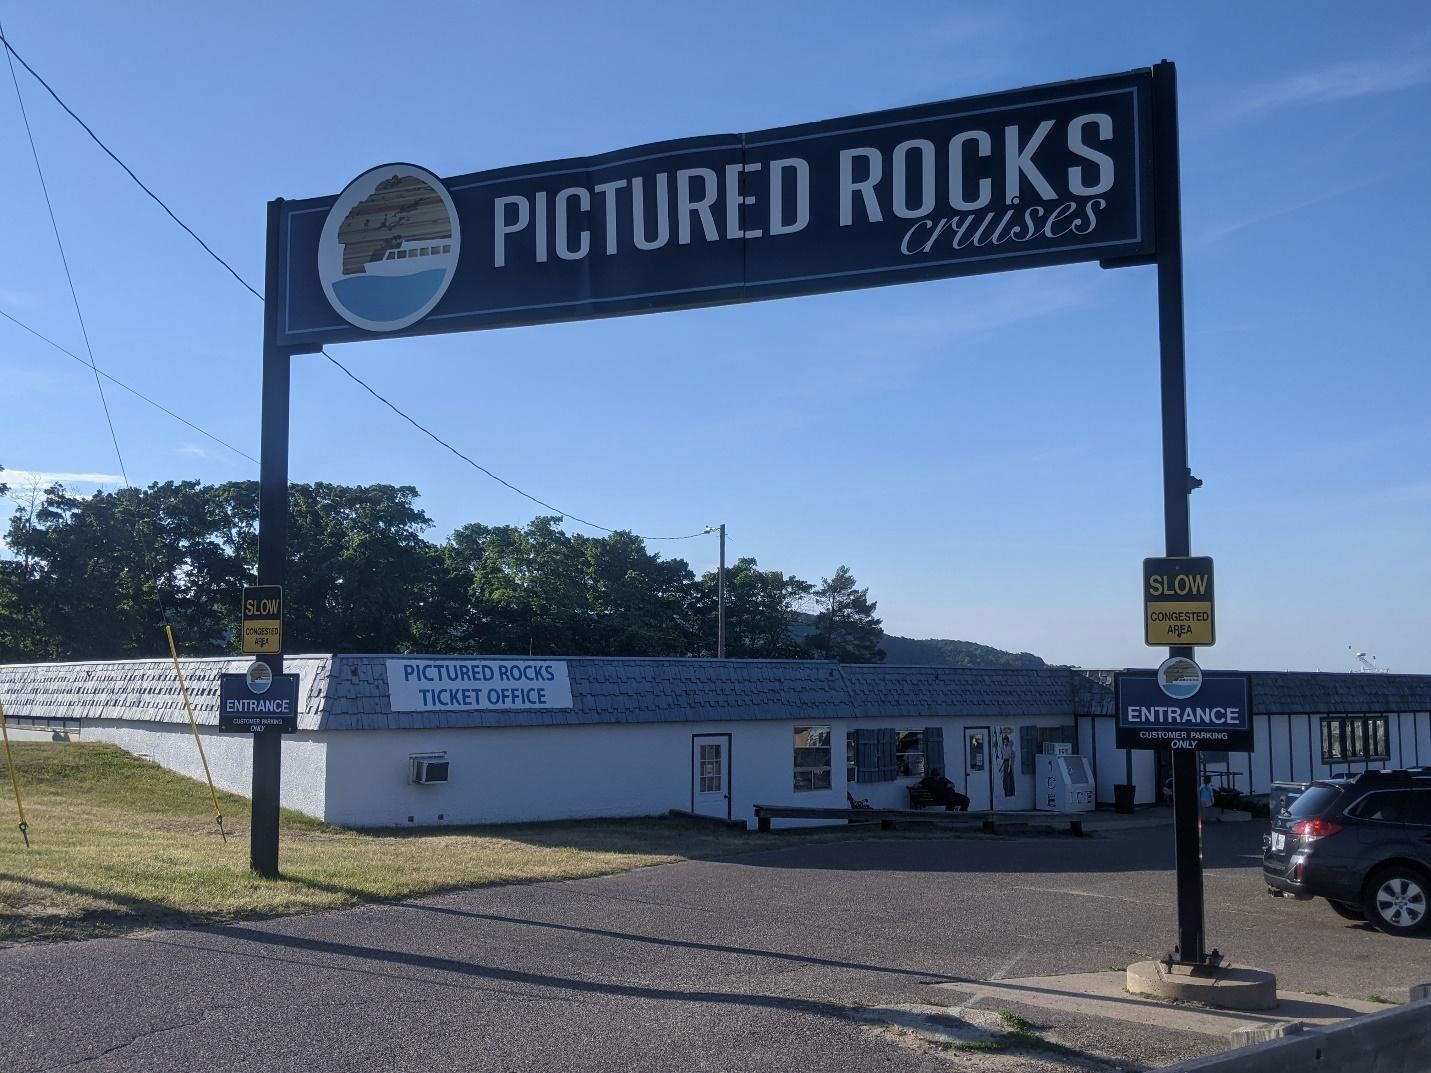 Pictured Rocks Cruises is located at 100 City Park Drive, Munising.